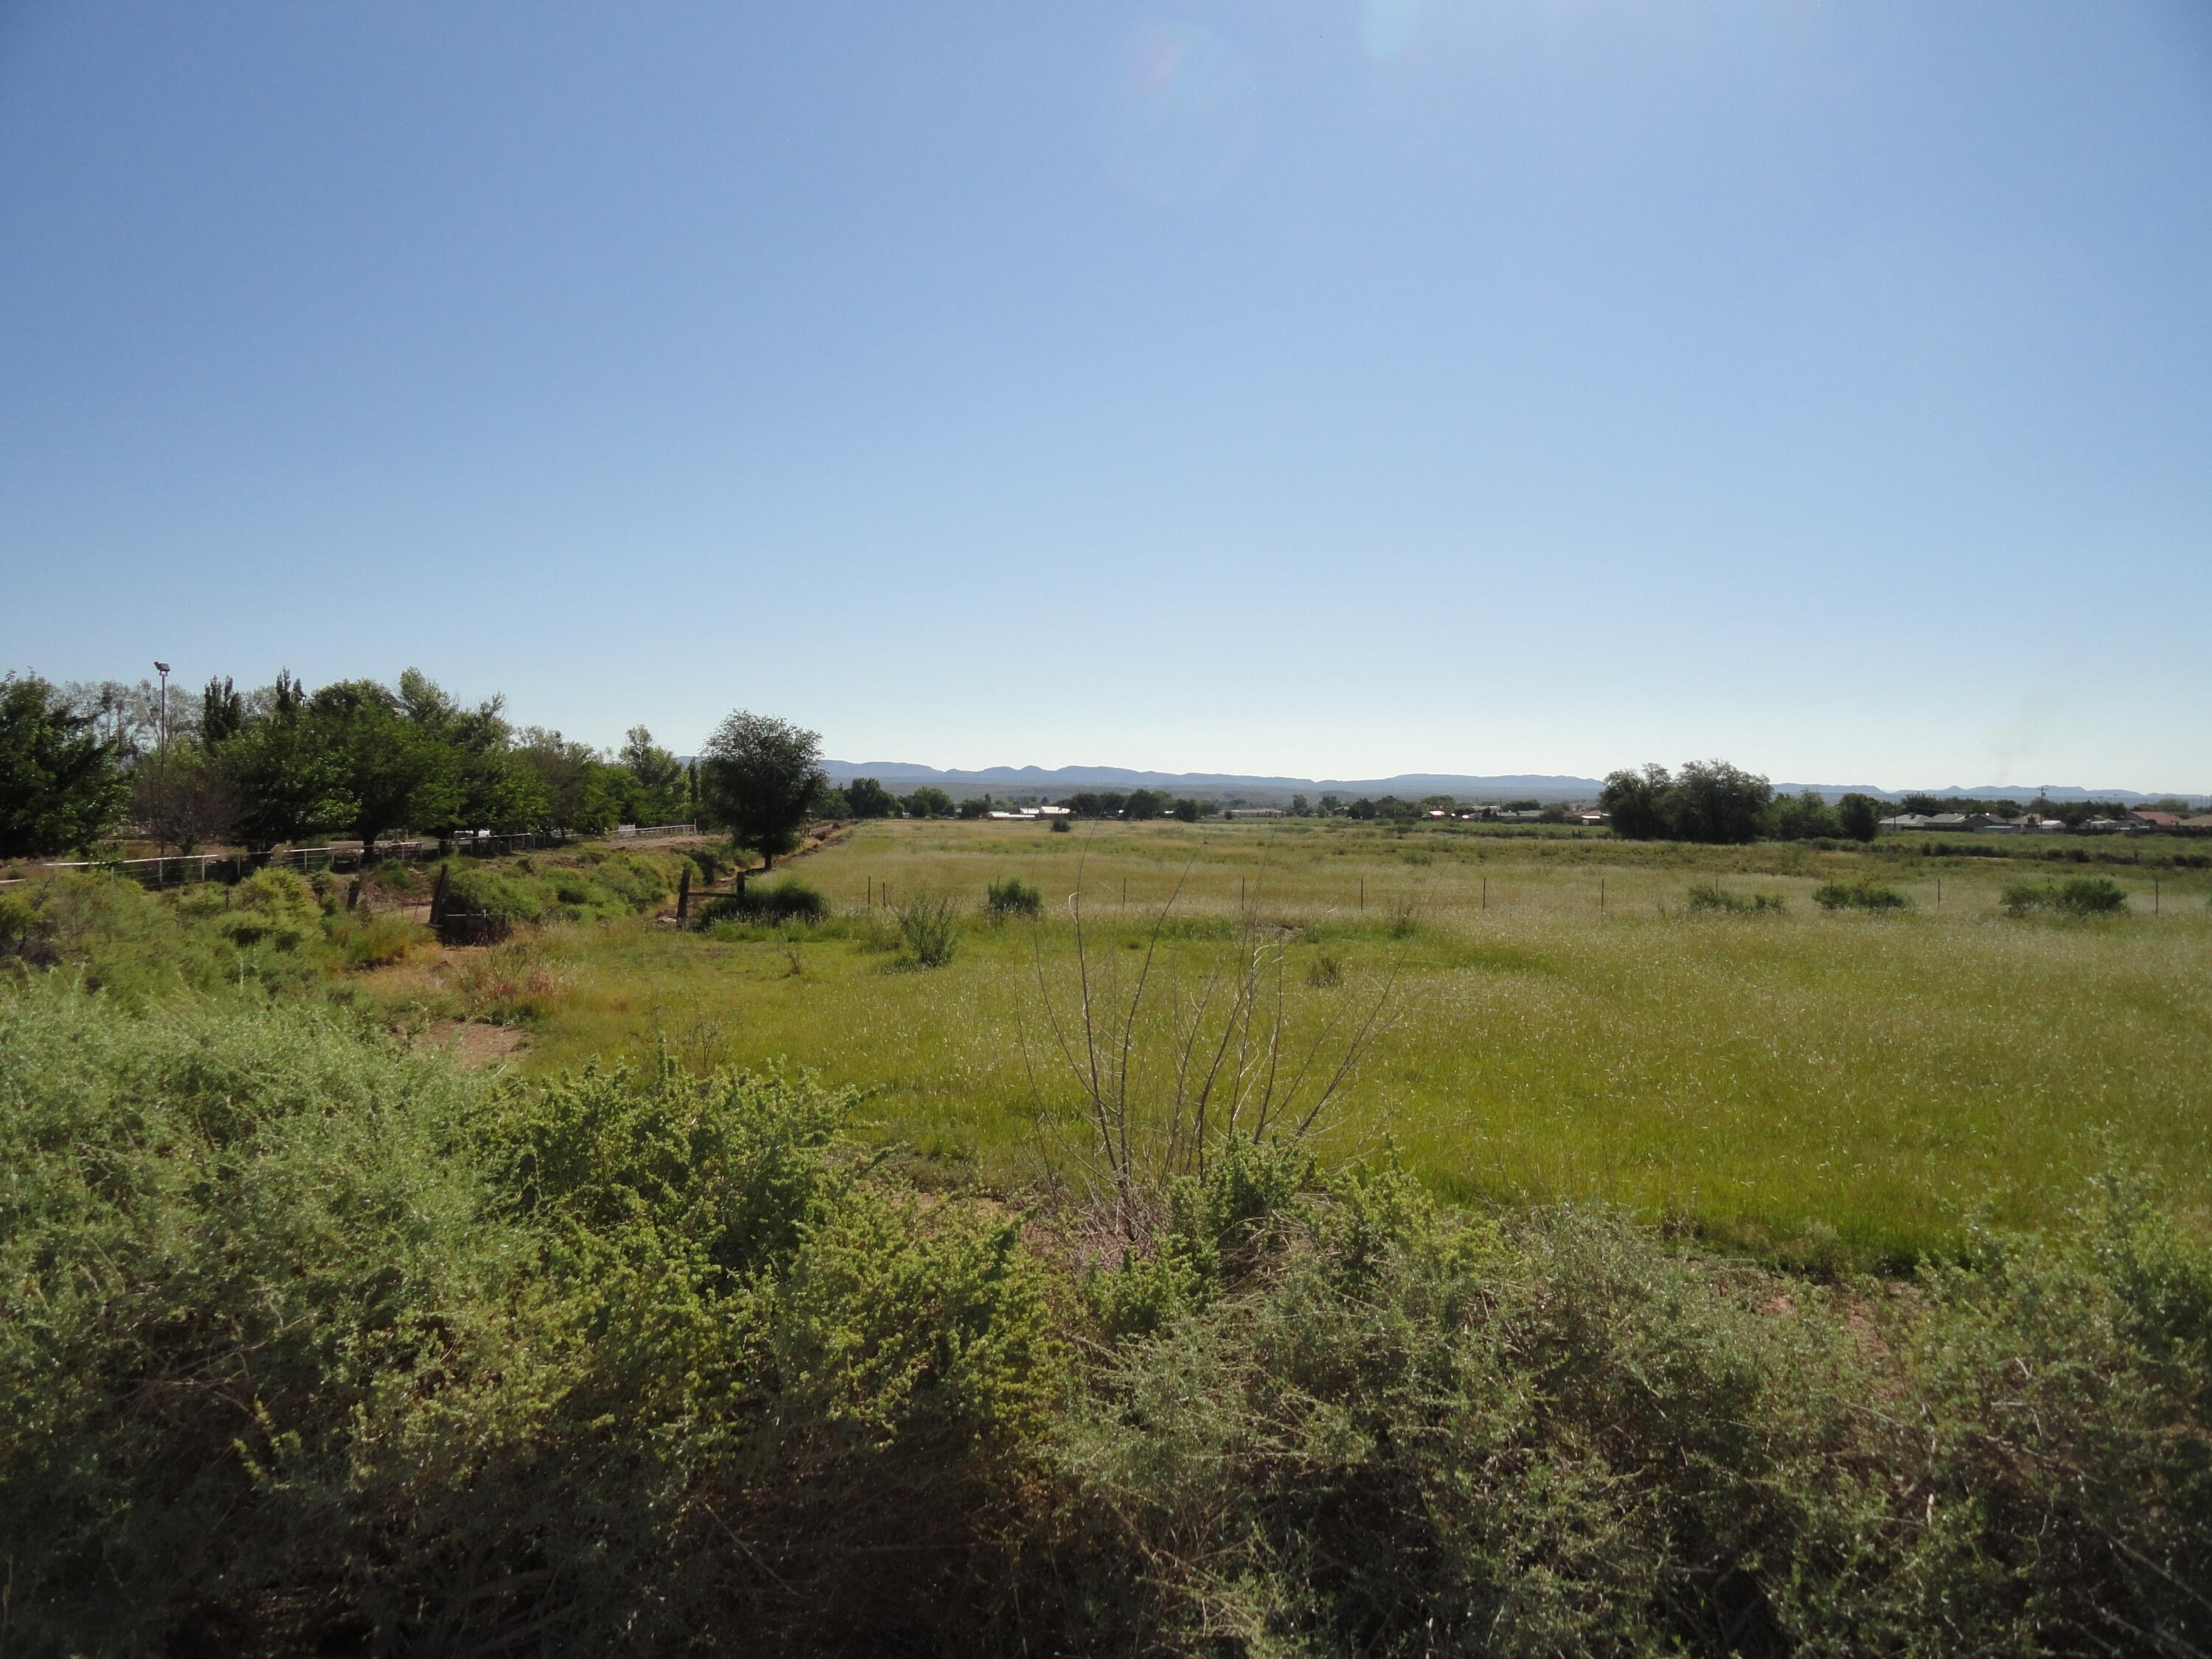 Tract 59b2a, Socorro, New Mexico 87801, ,Land,For Sale, Tract 59b2a,1061179